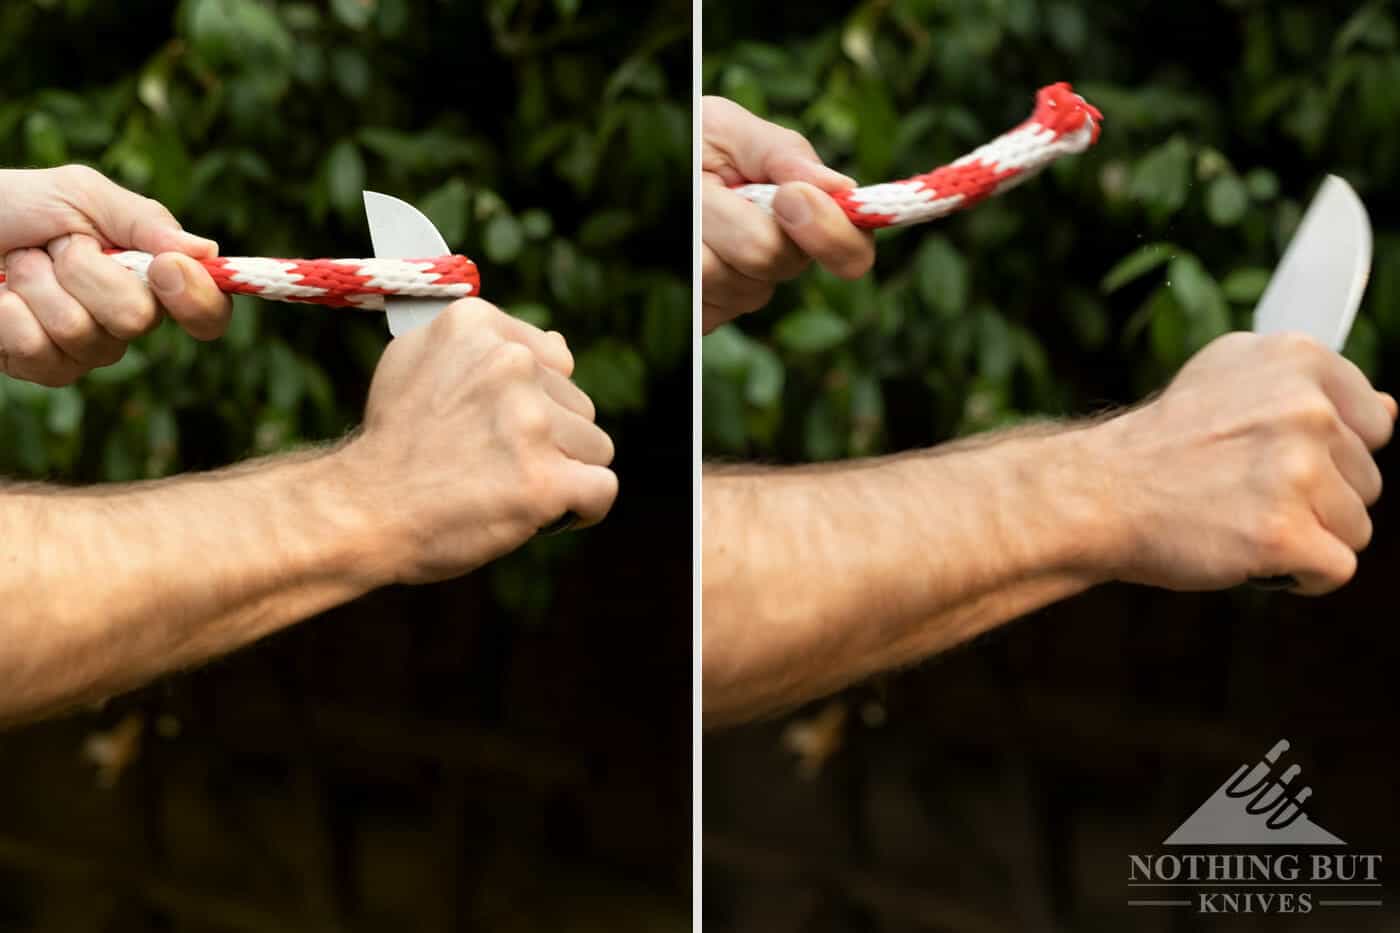 A two part image showing the Off-Grid Badger slicing threw a rope. 